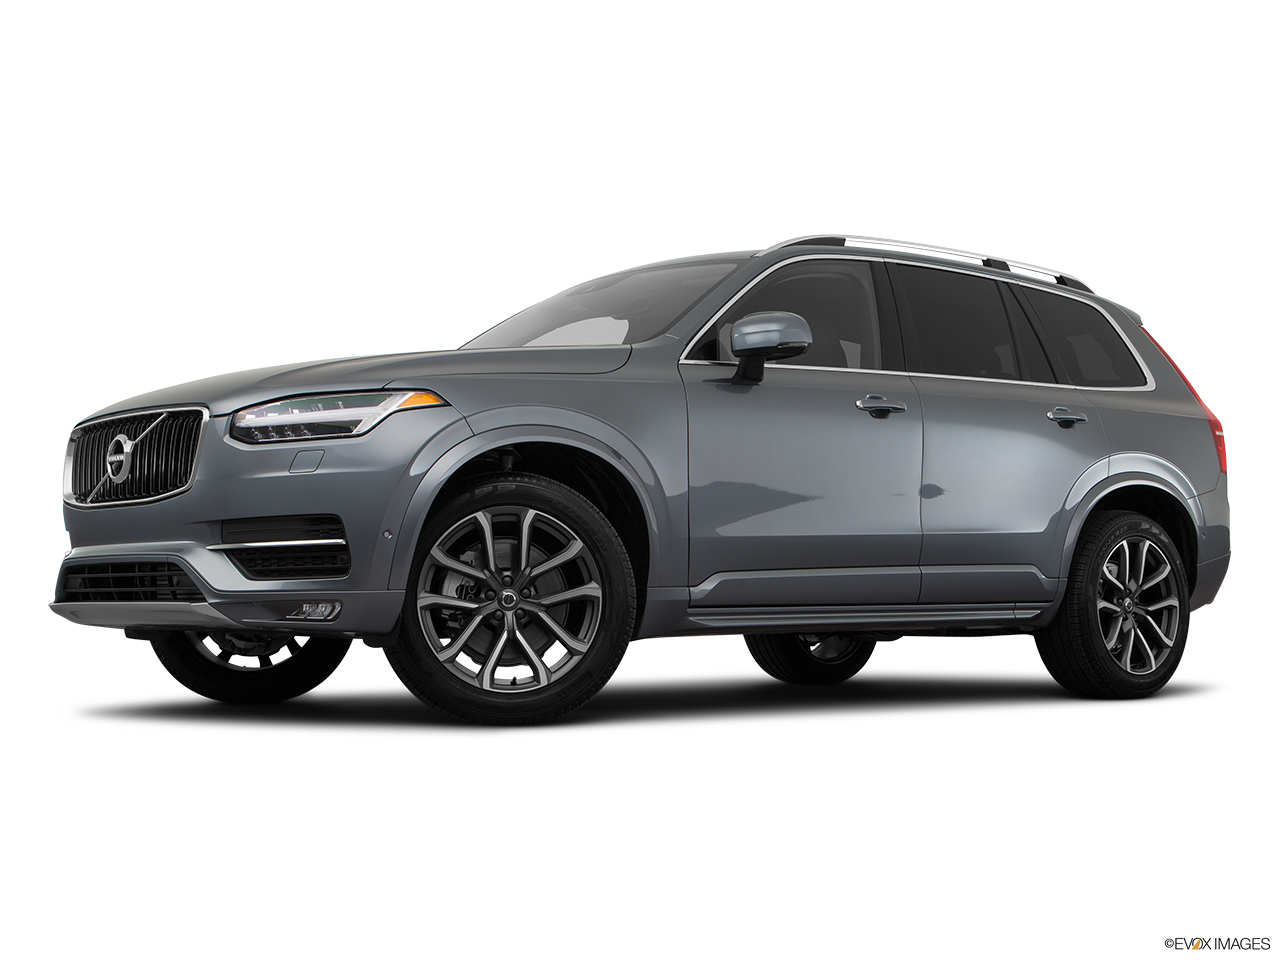 2017 Volvo XC90 T6 Momentum Low/wide front 5/8. 